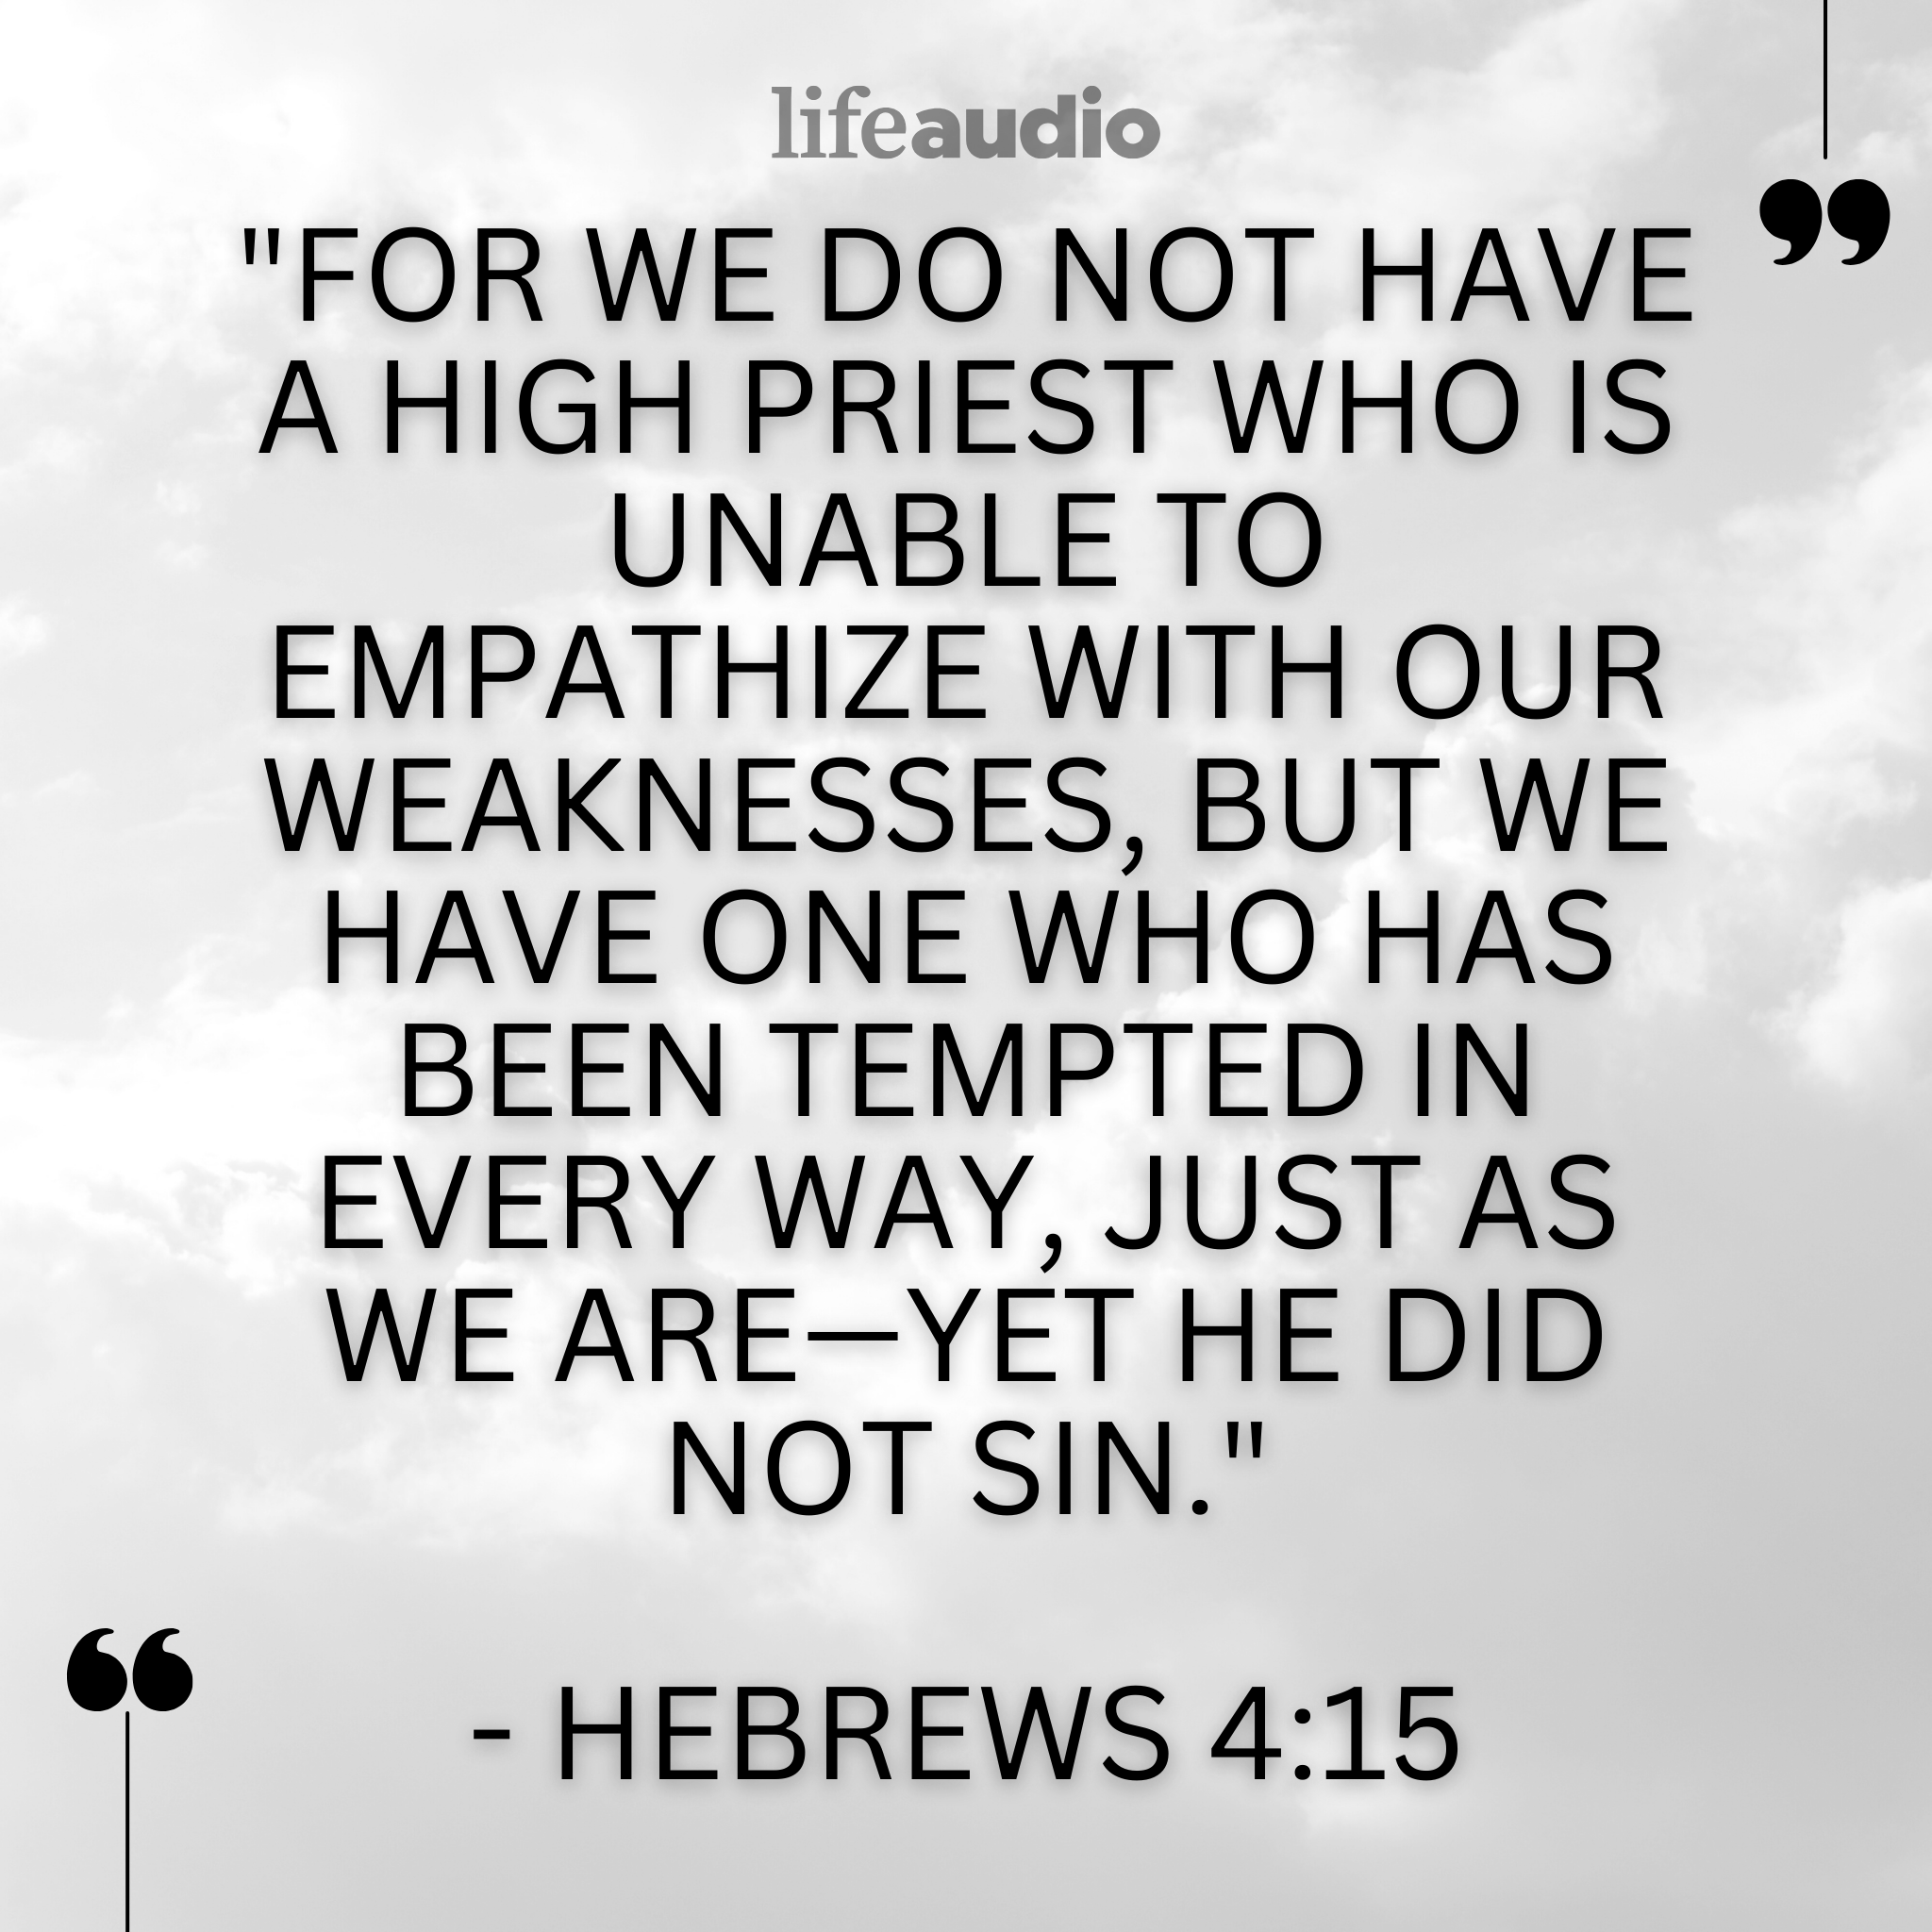 Best Of: The God Who Empathizes with Our Weakness (Hebrews 4:15)